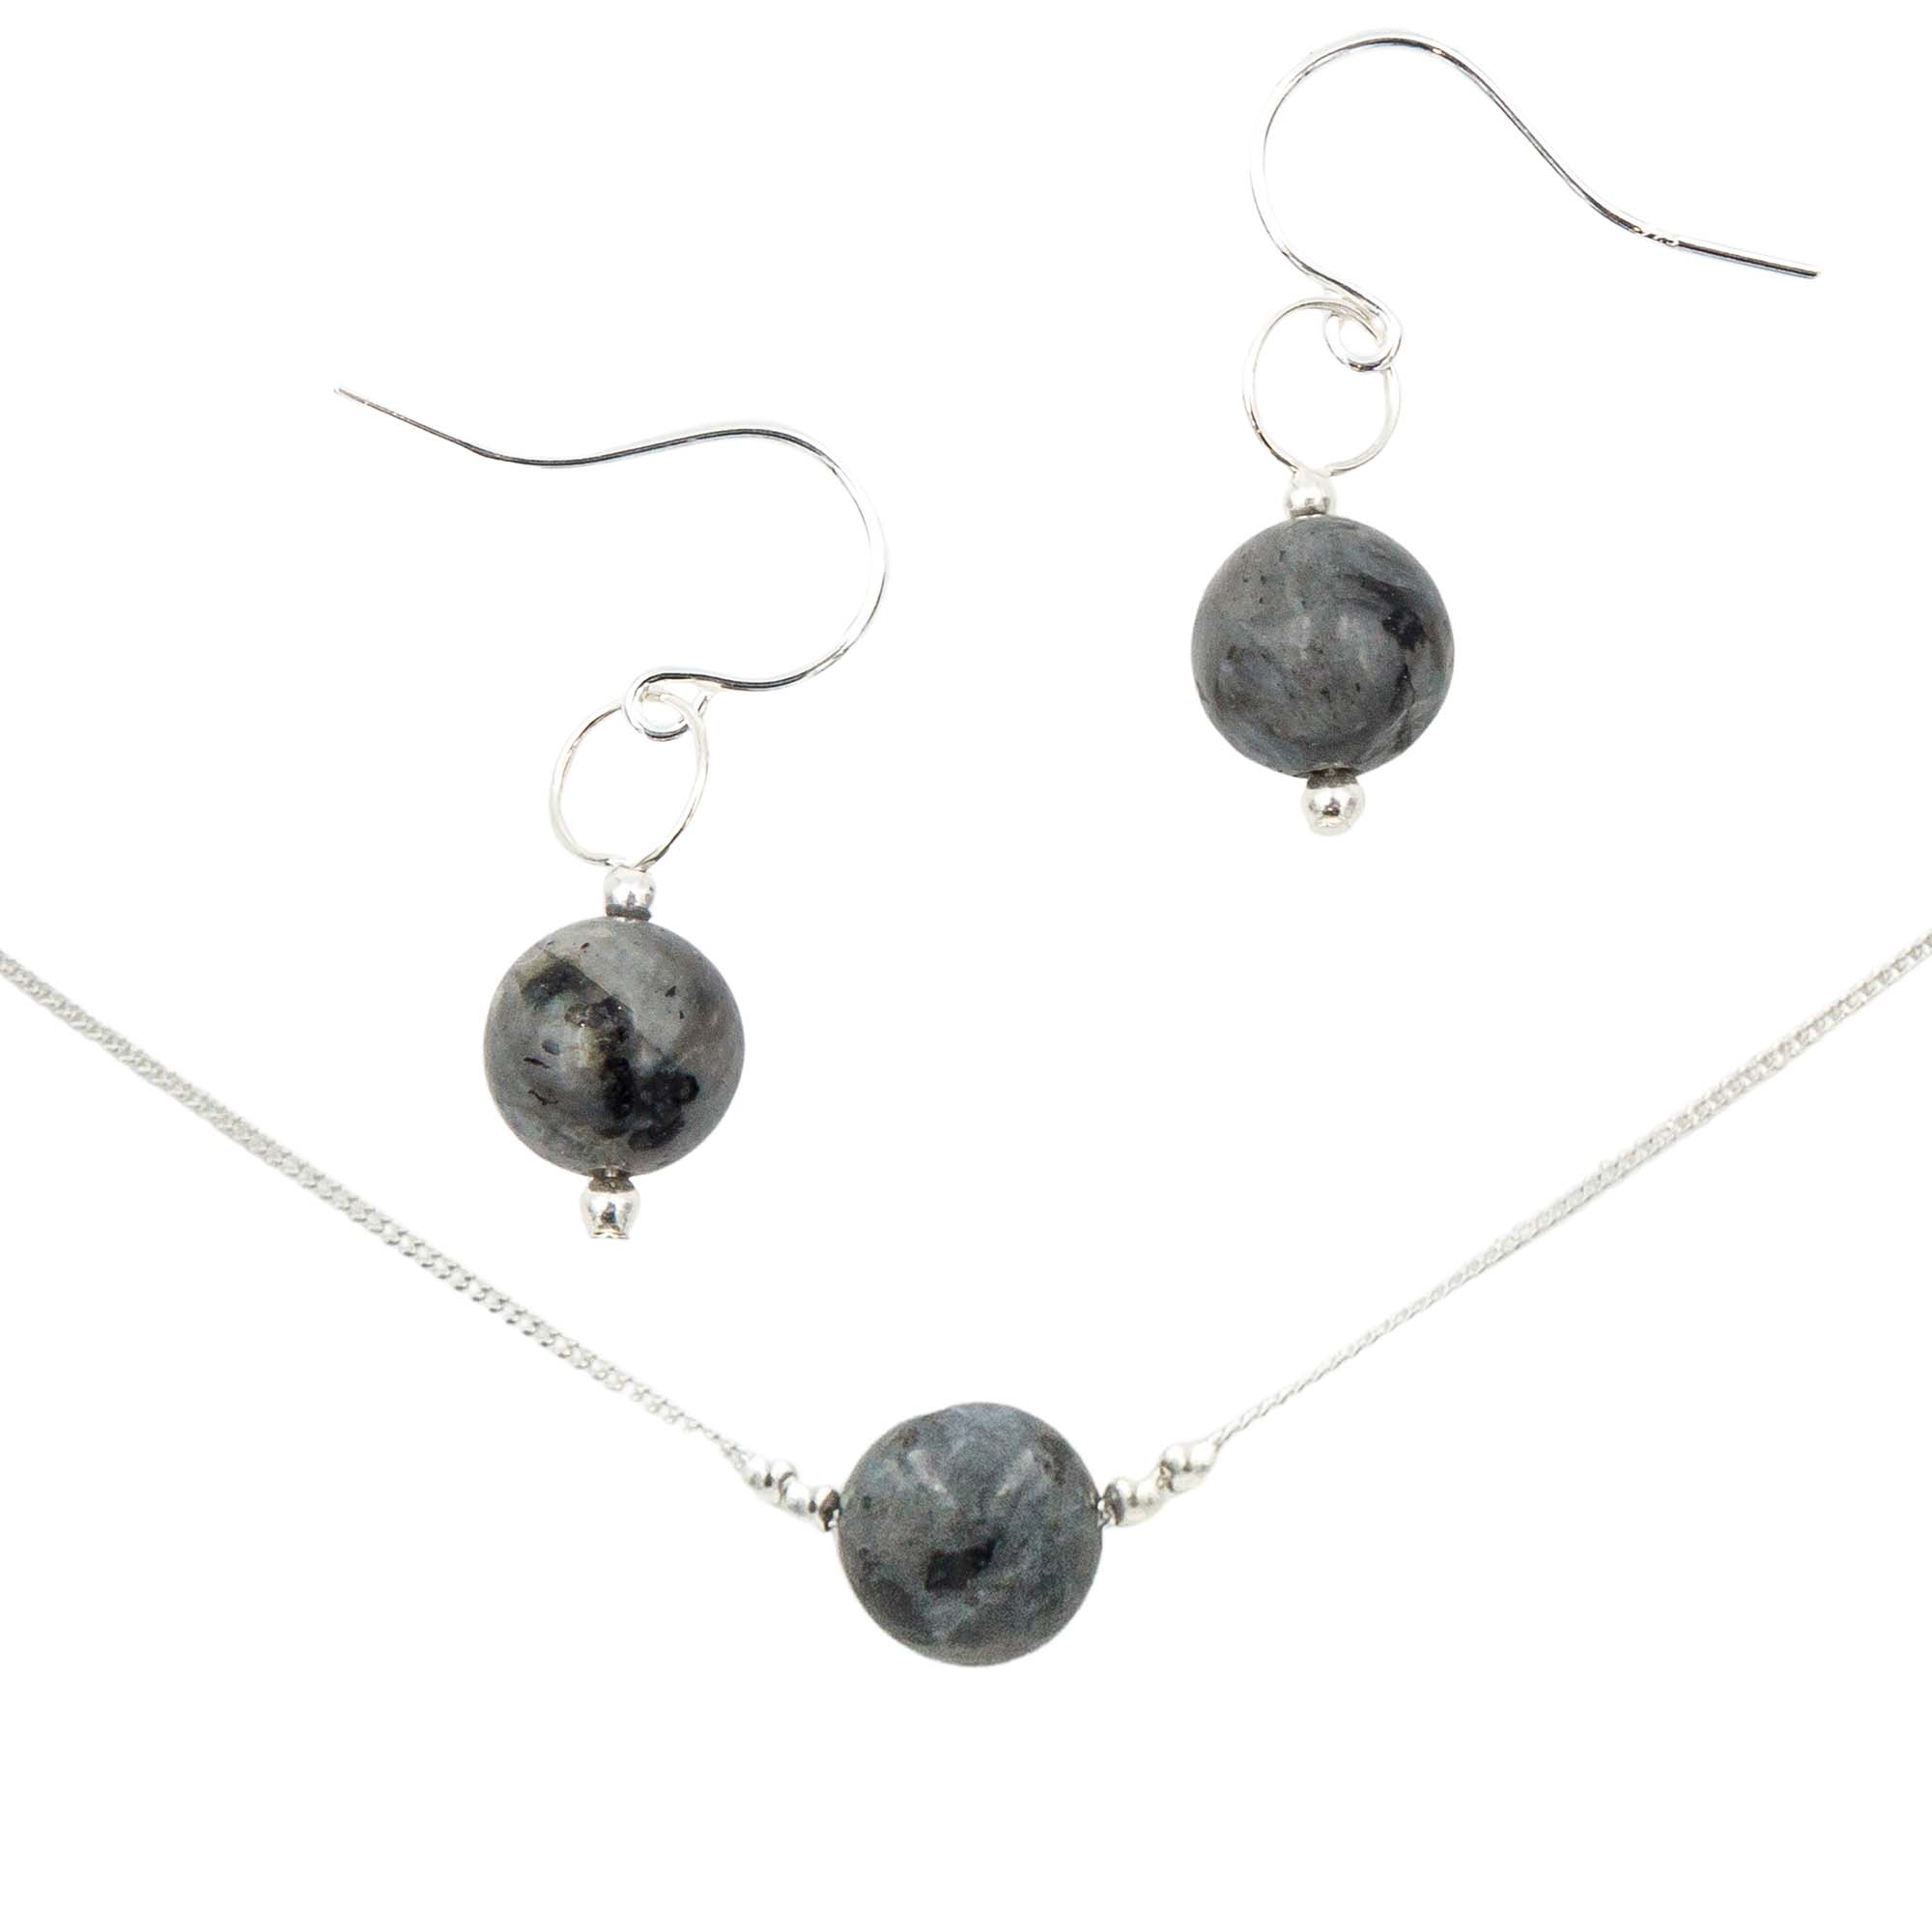 Earth Song Jewelry Black Moonstone Larvikite Sterling Silver Earrings & Necklace Set